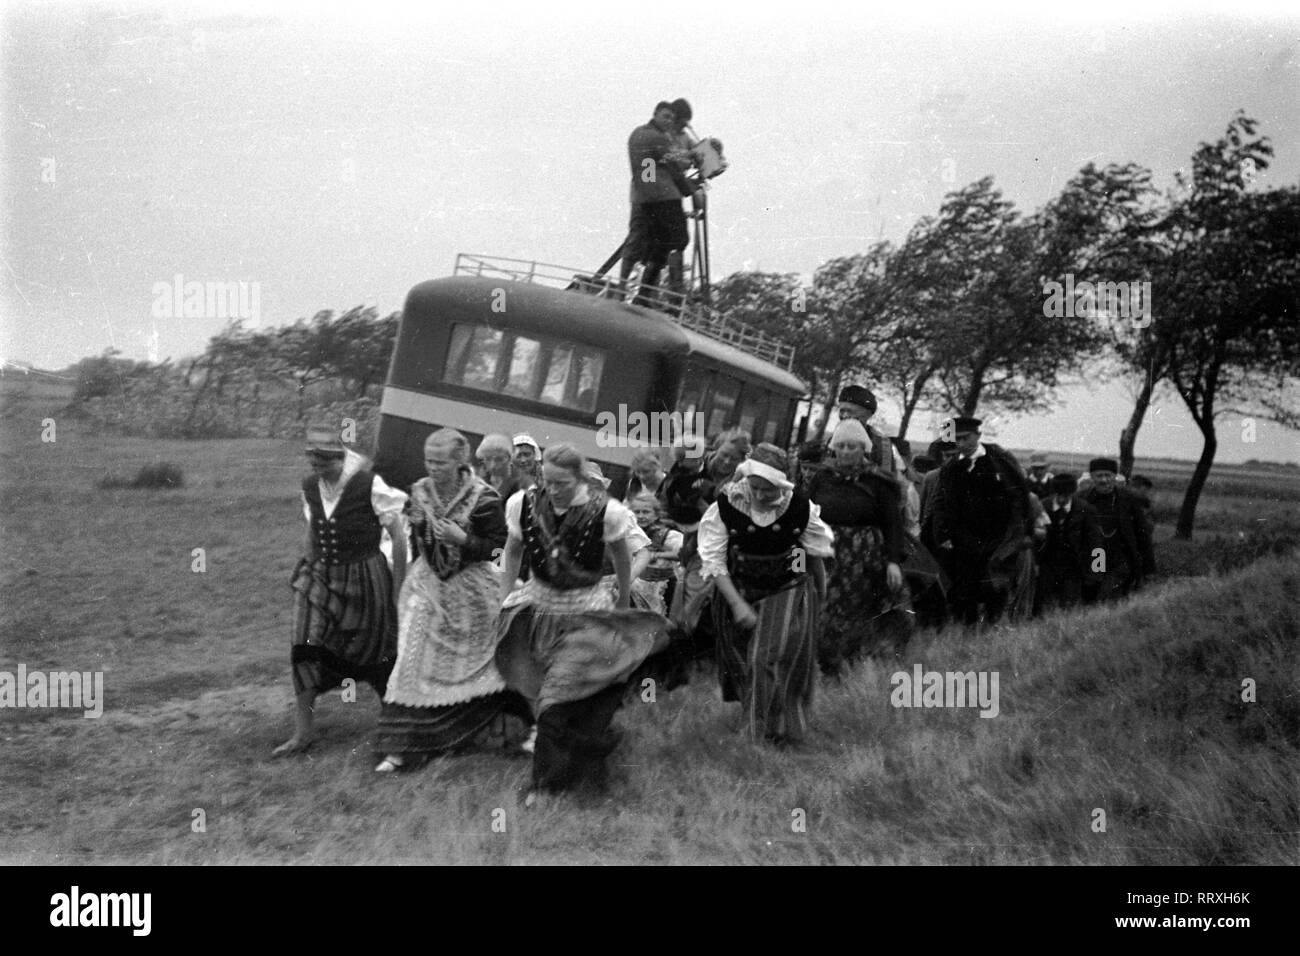 DER SCHIMMELREITER - Filming of the flight-scene .The cameraman stands on the top of an old bus, 10/1933, I.12/24-42 Schimmelreiter Stock Photo